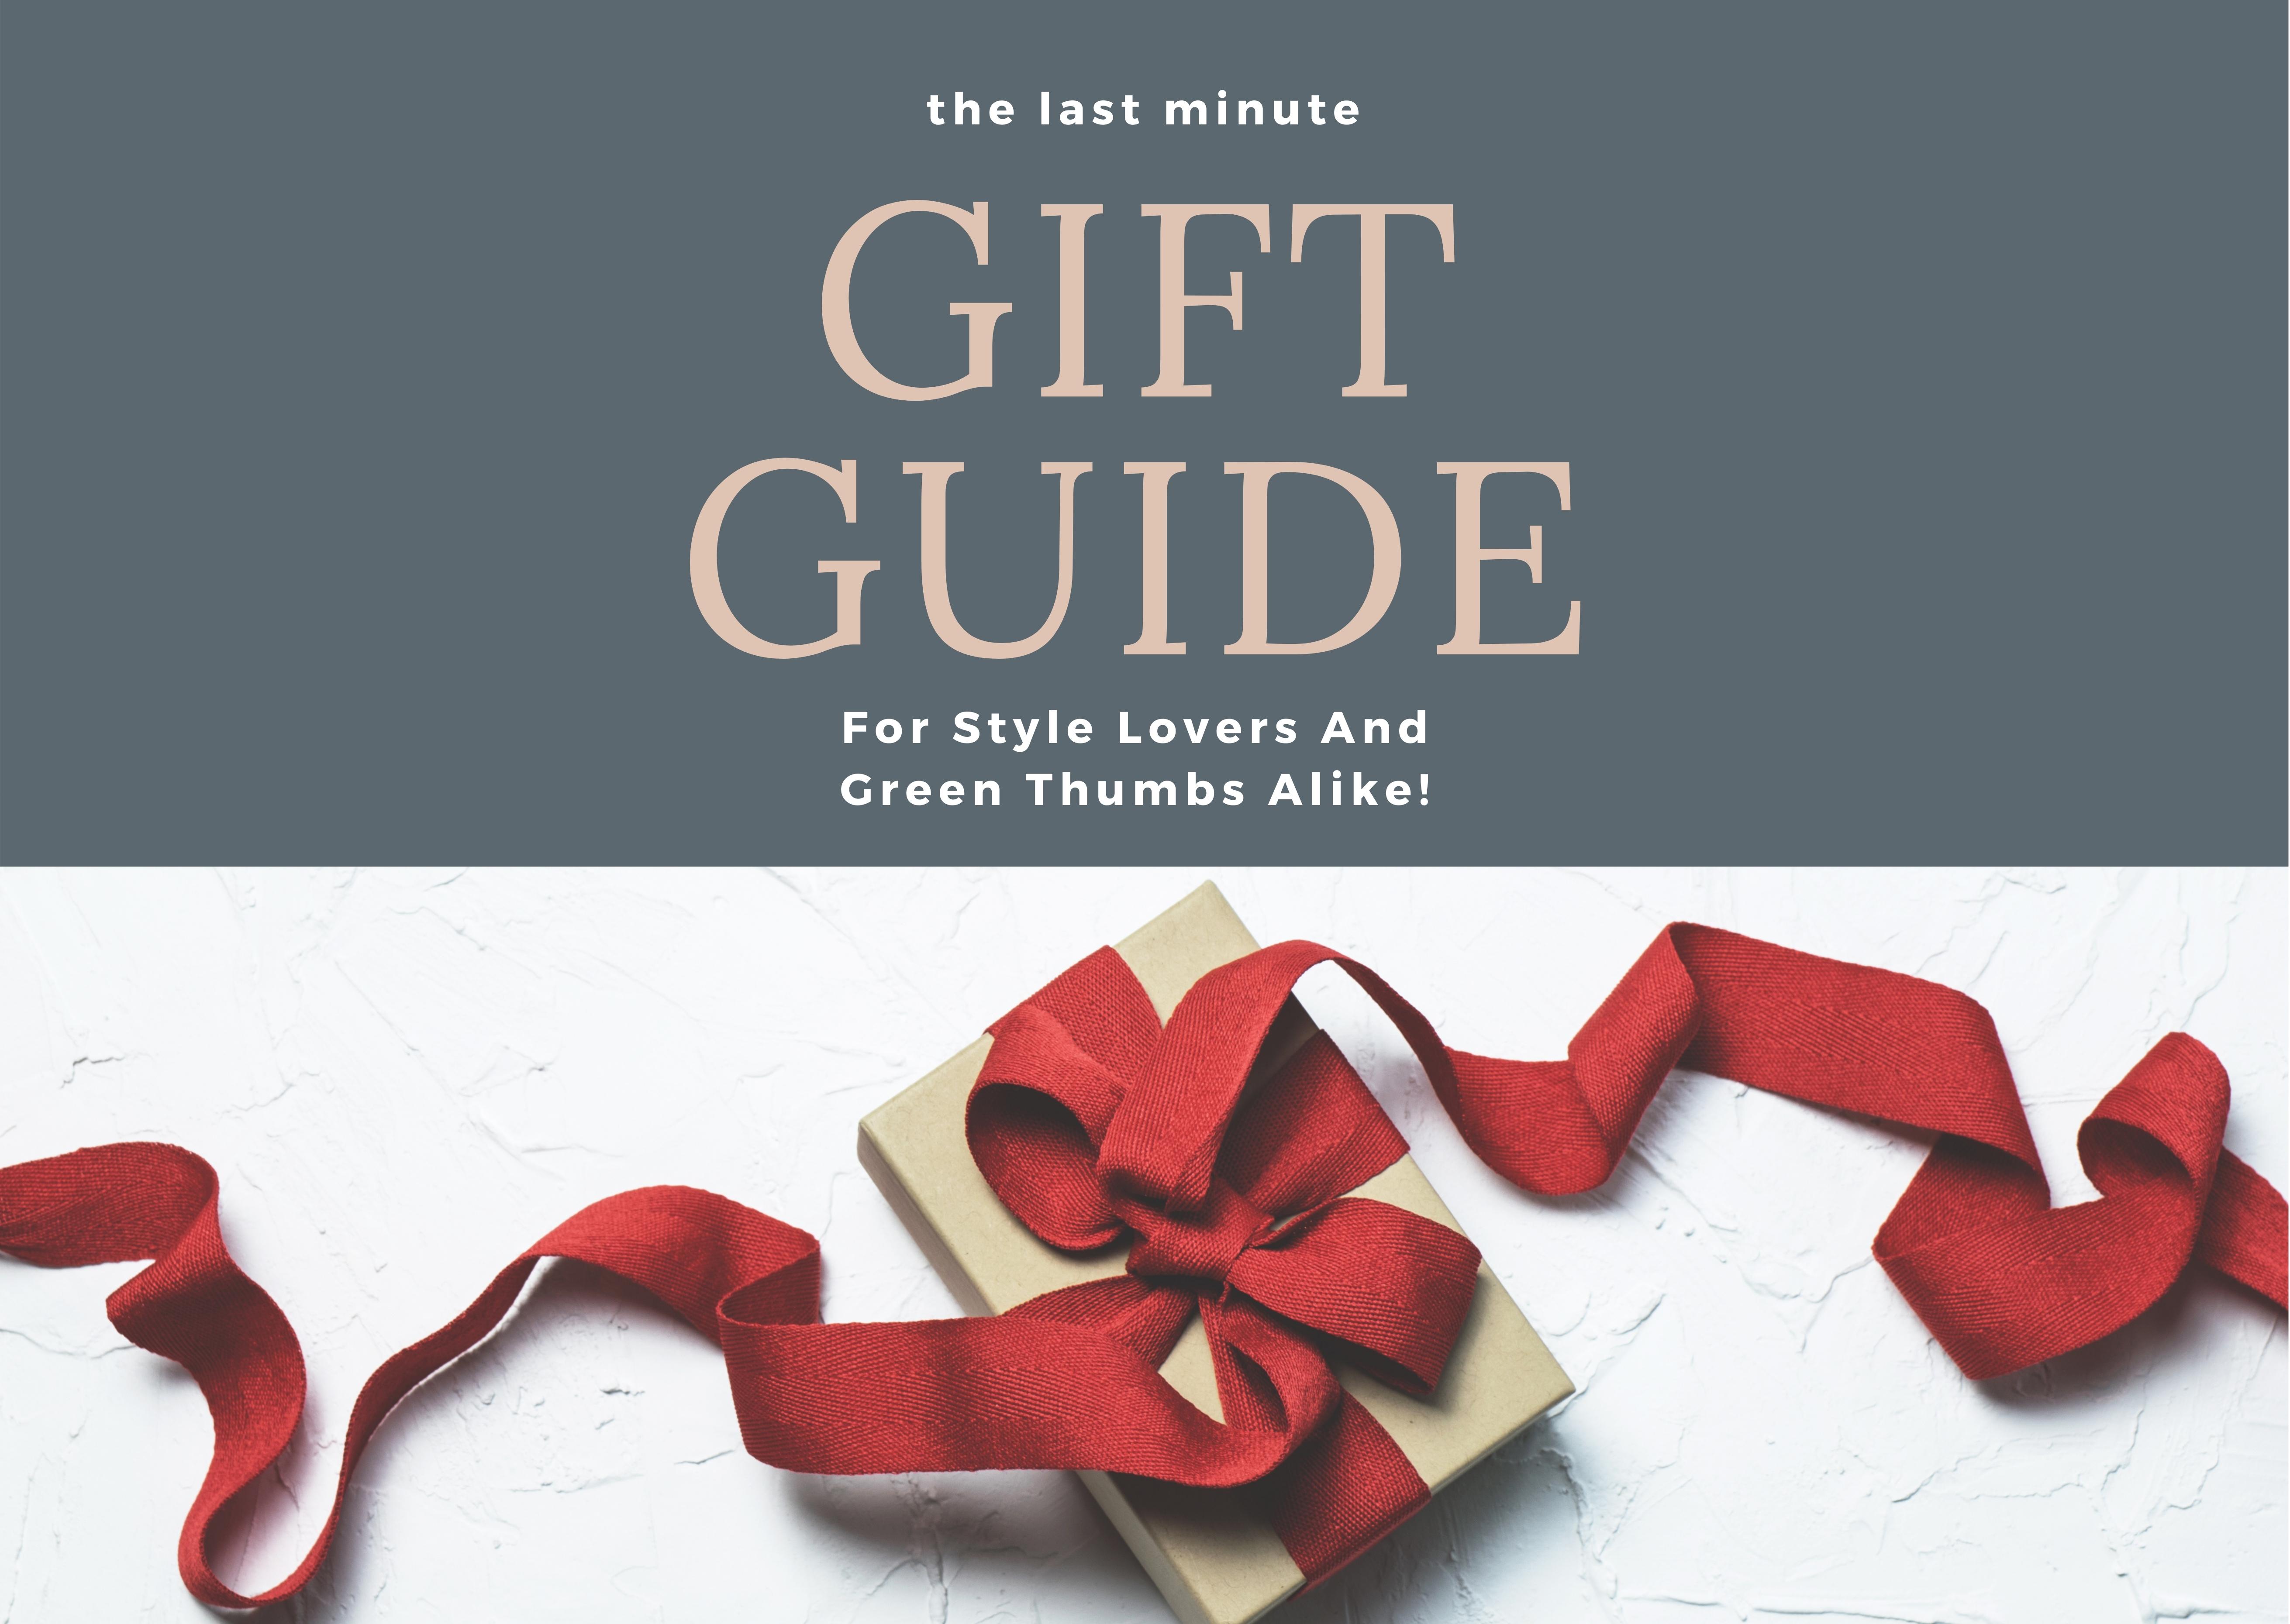 The Last Minute Garden Gift Guide